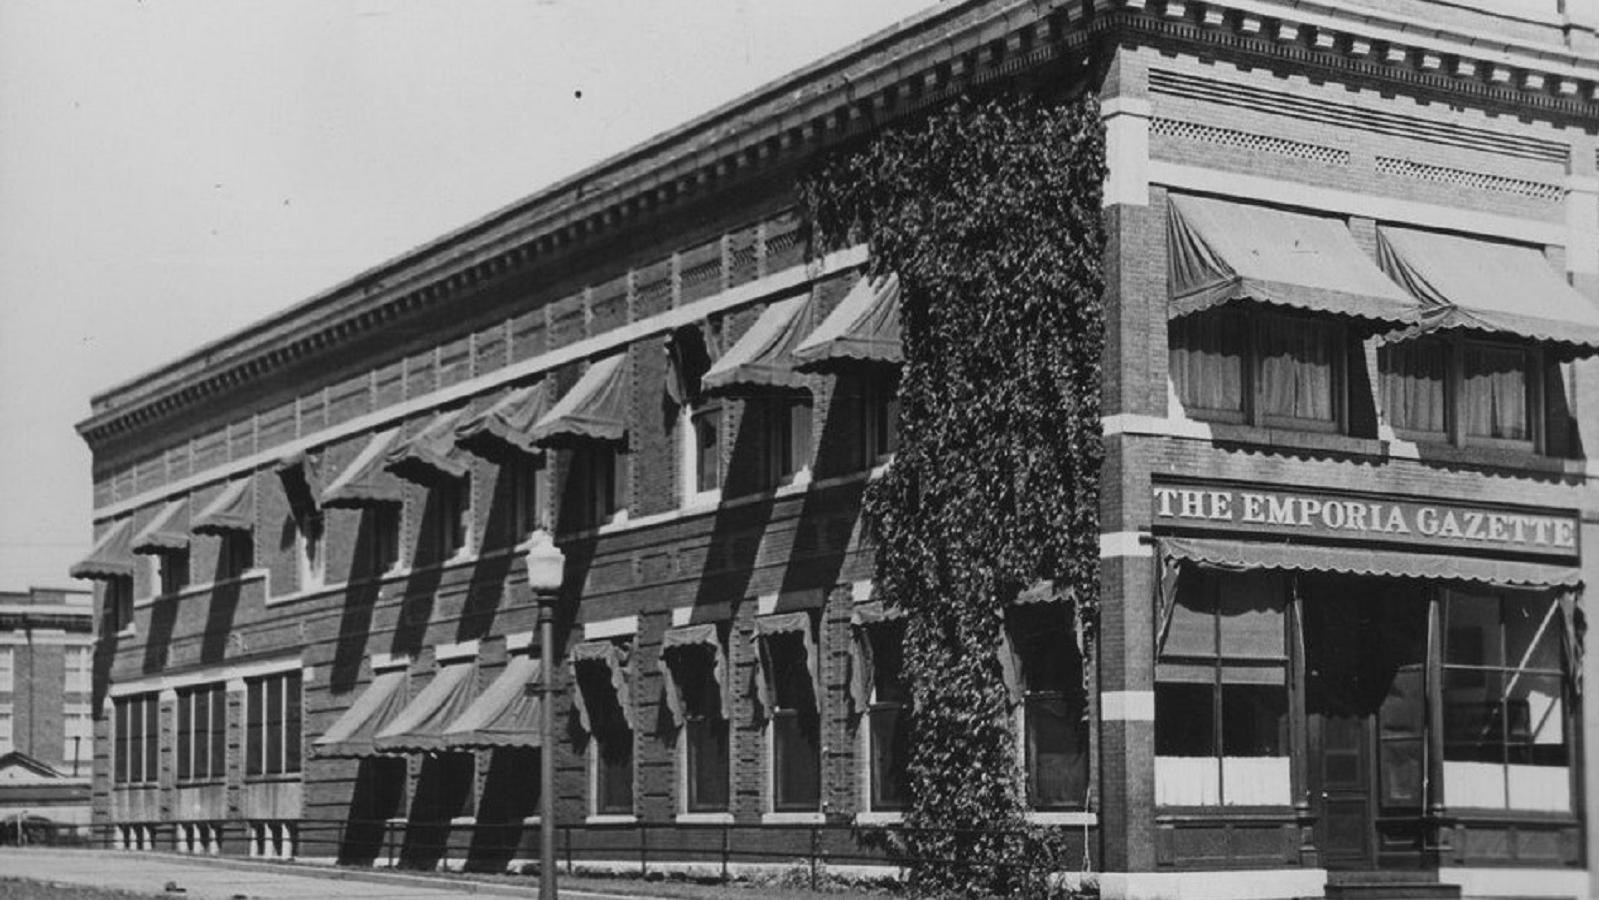 A black and white photo of the office of the Emporia Gazette newspaper company.